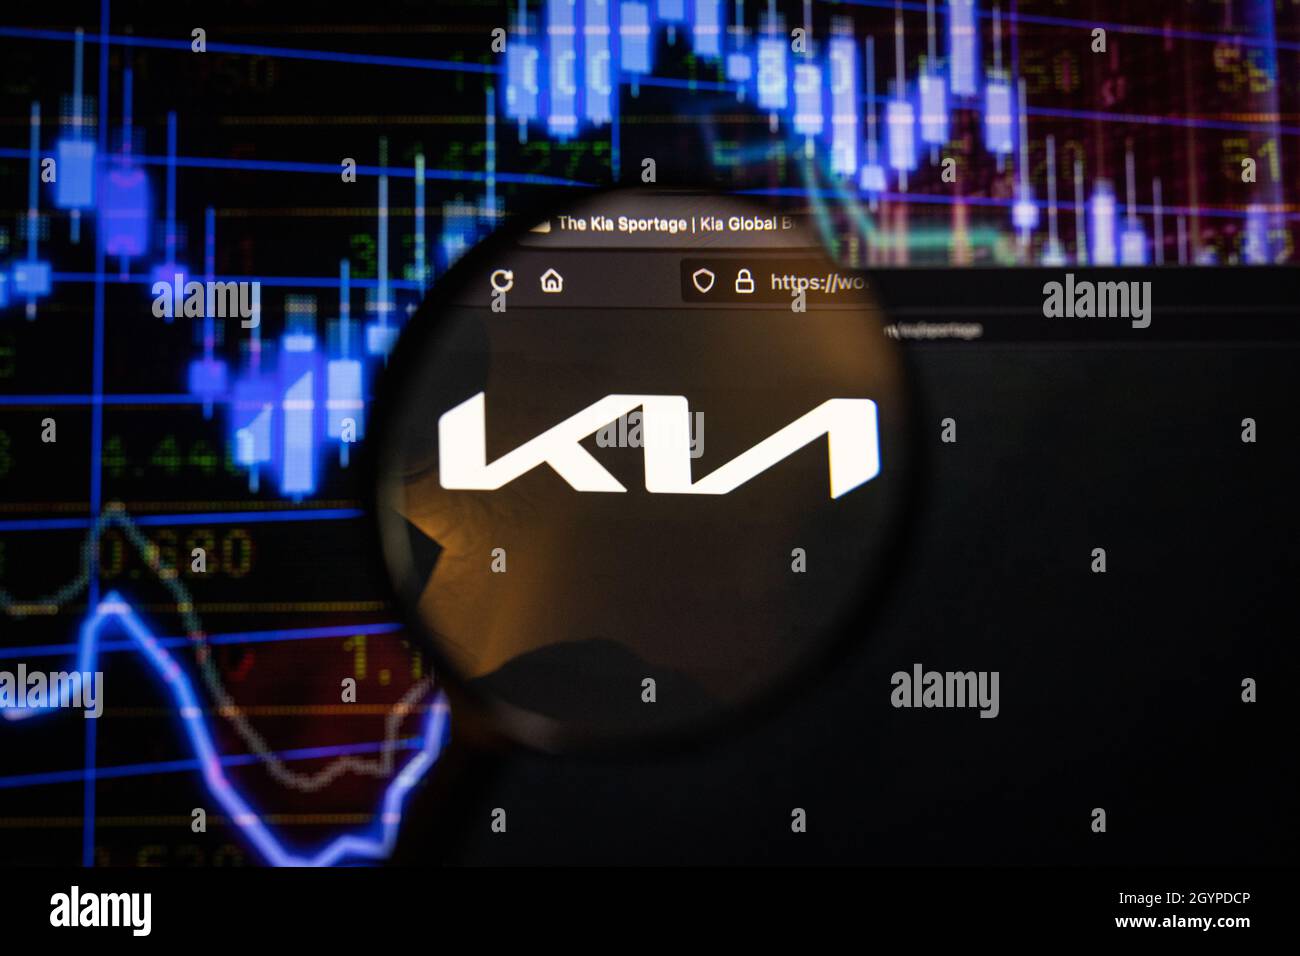 Kia company logo on a website with blurry stock market developments in the background, seen on a computer screen through a magnifying glass Stock Photo